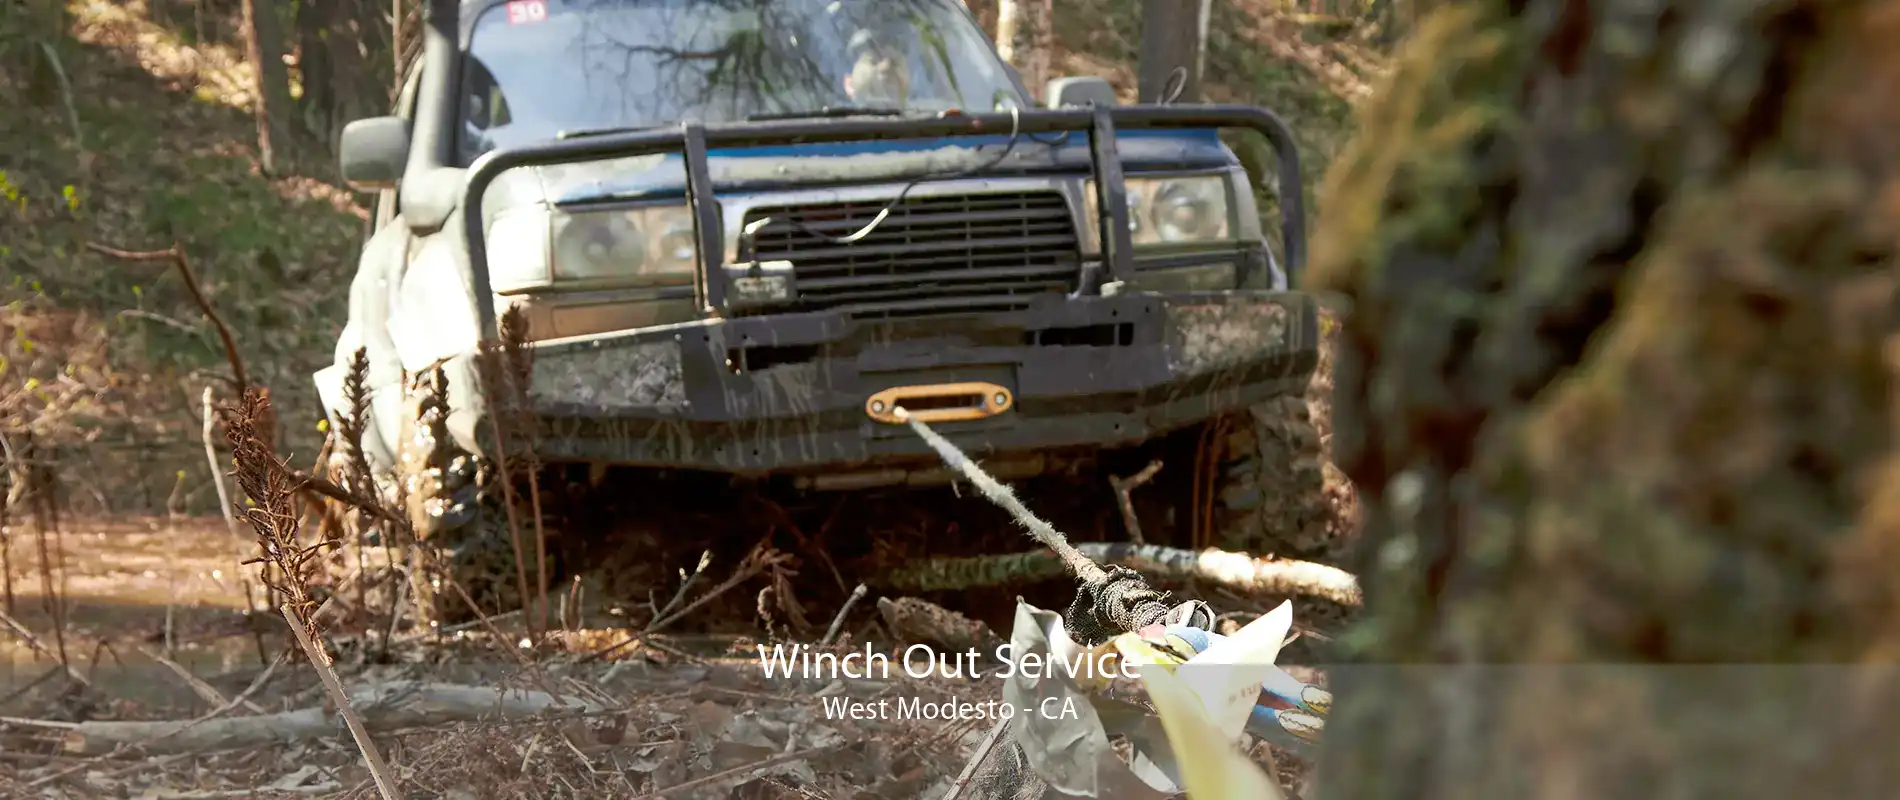 Winch Out Service West Modesto - CA